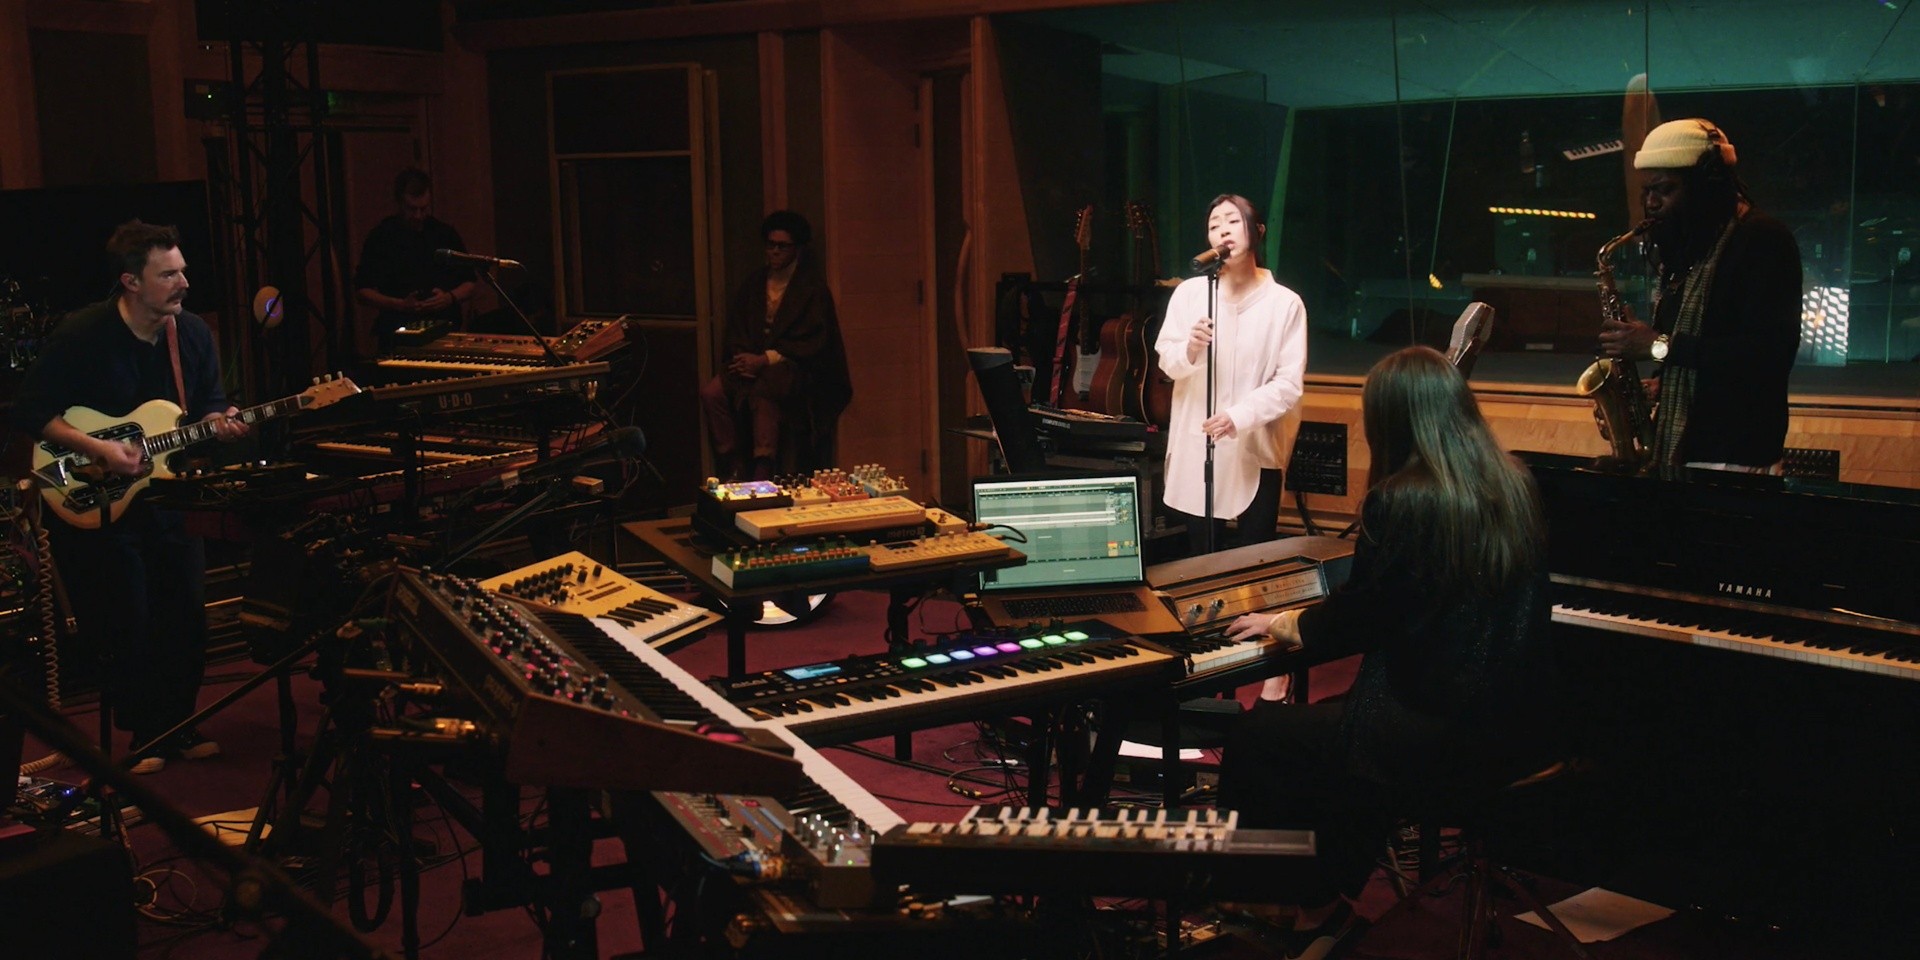 Without need for spectacle, Hikaru Utada delivers immersive ‘Live Sessions from the AIR Studios’ – gig report